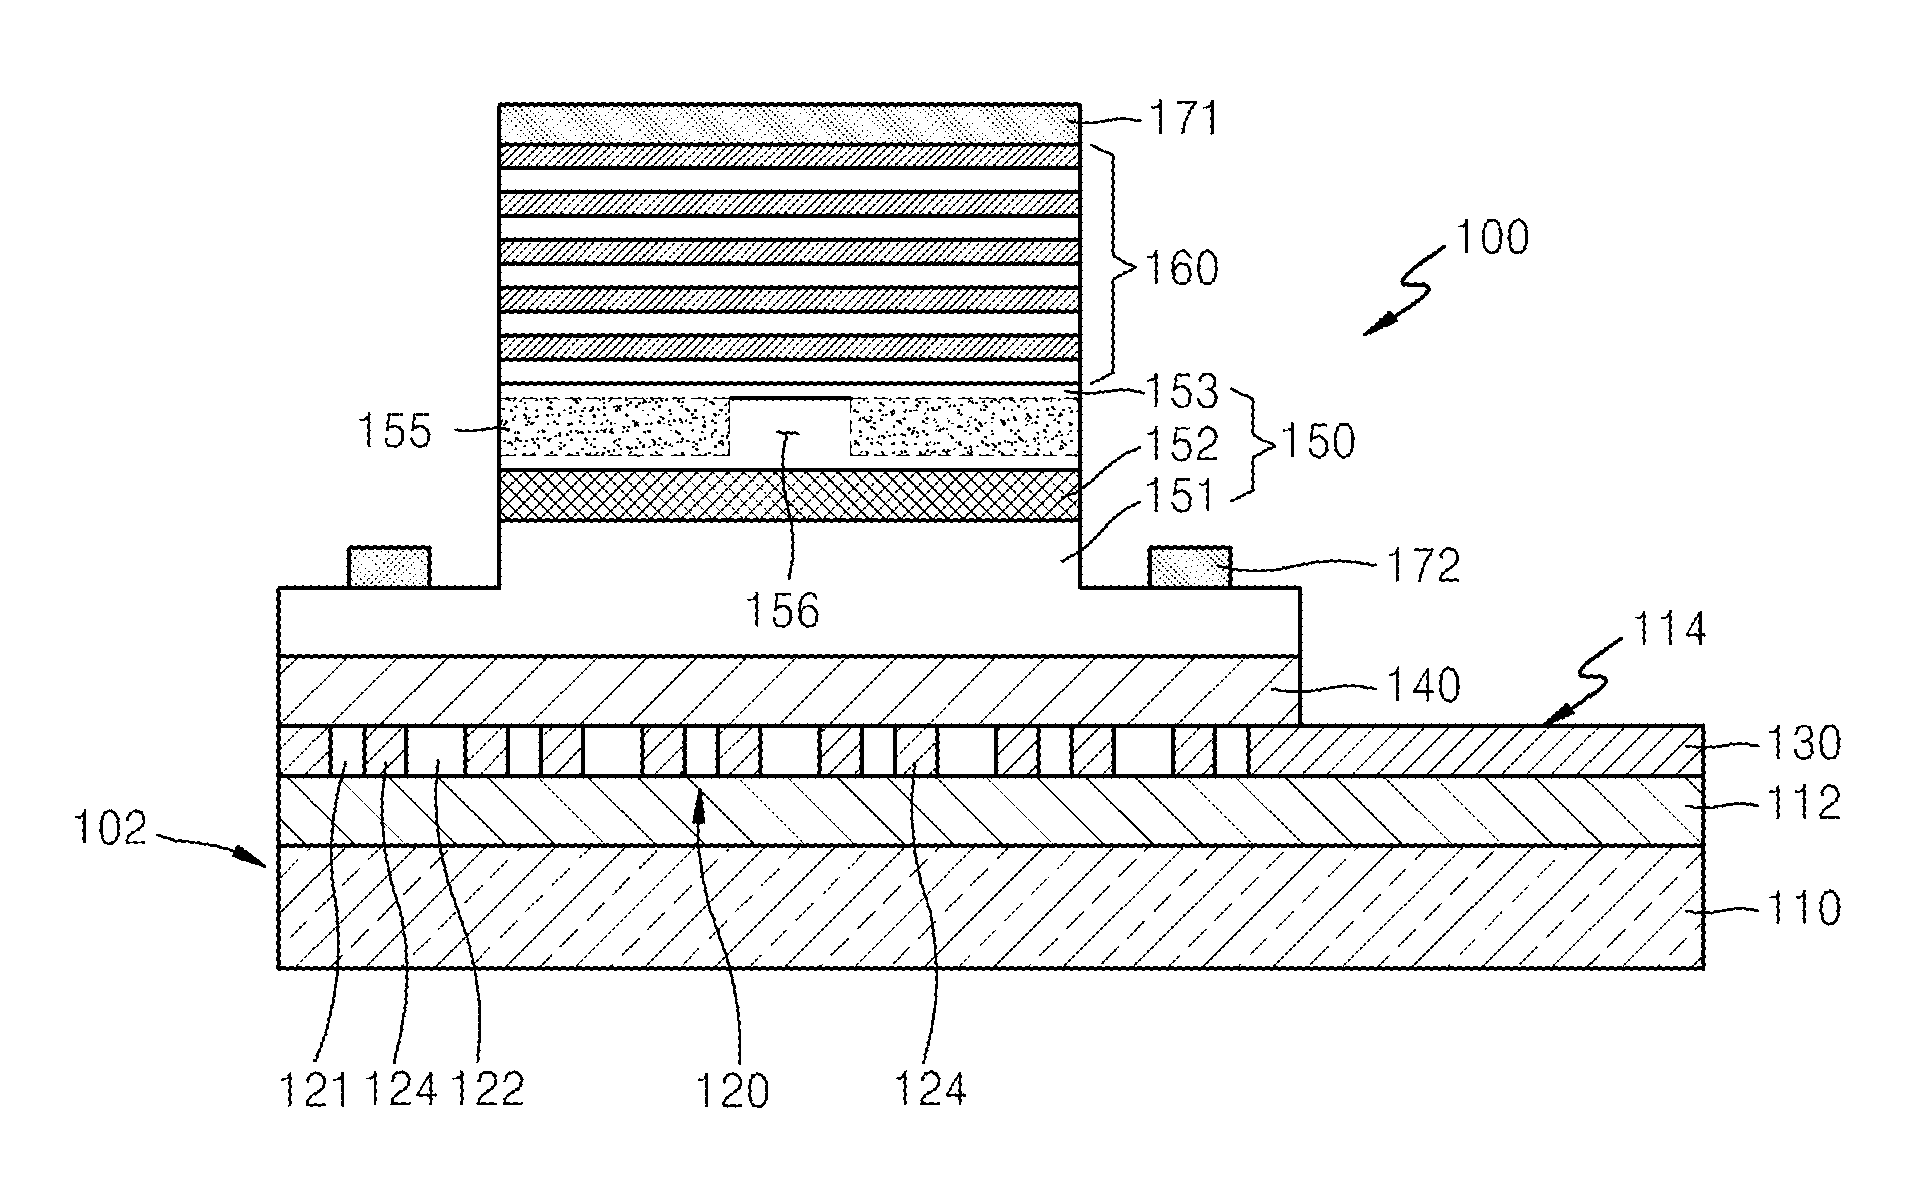 Hybrid vertical cavity laser for photonic integrated circuit